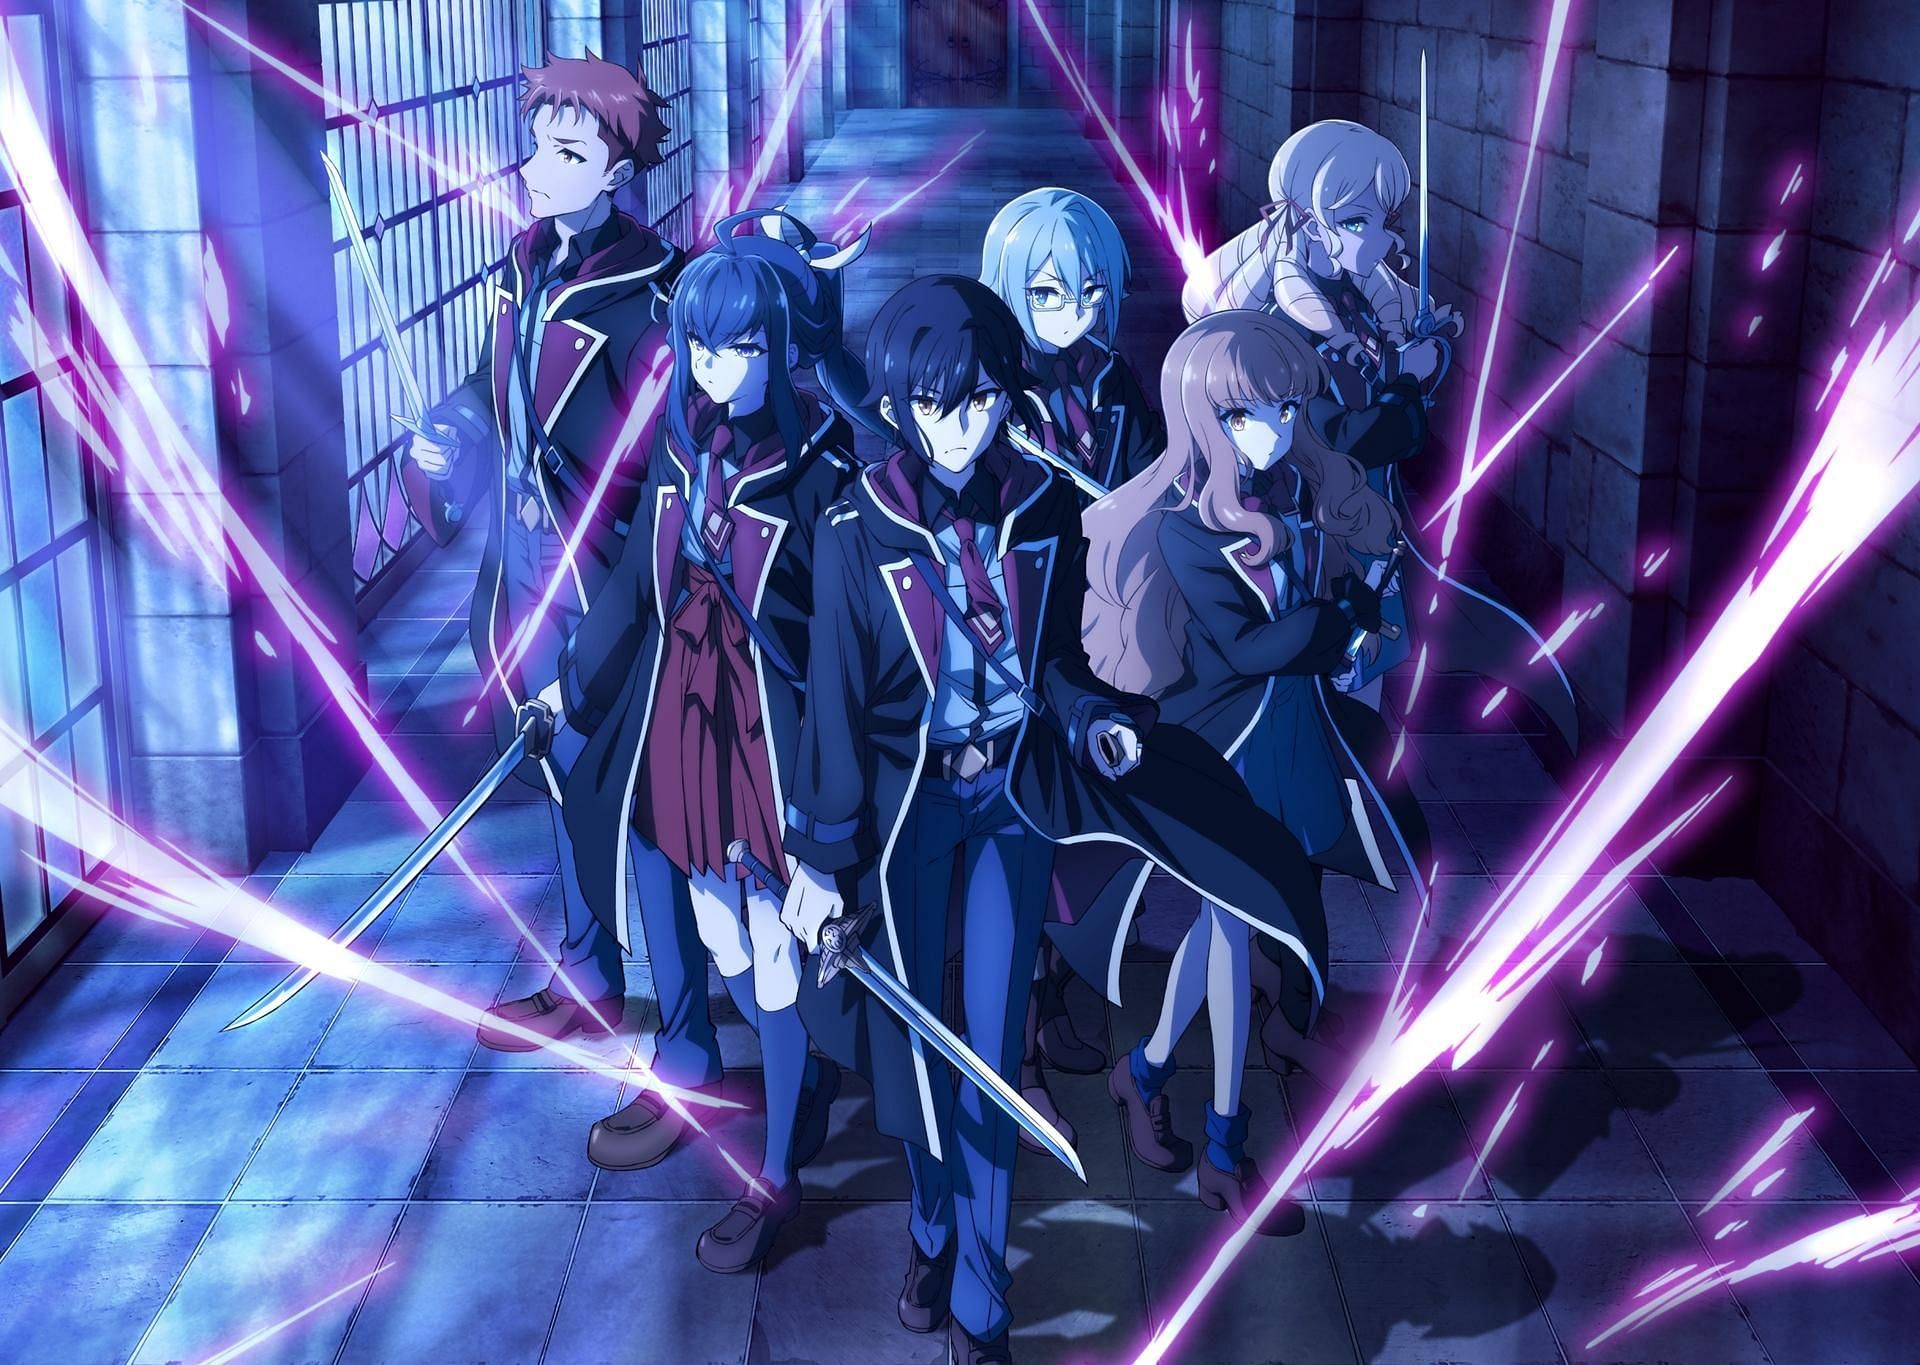 Reign of the Seven Spellblades episode 1 is coming out soon (Image via J.C. Staff).